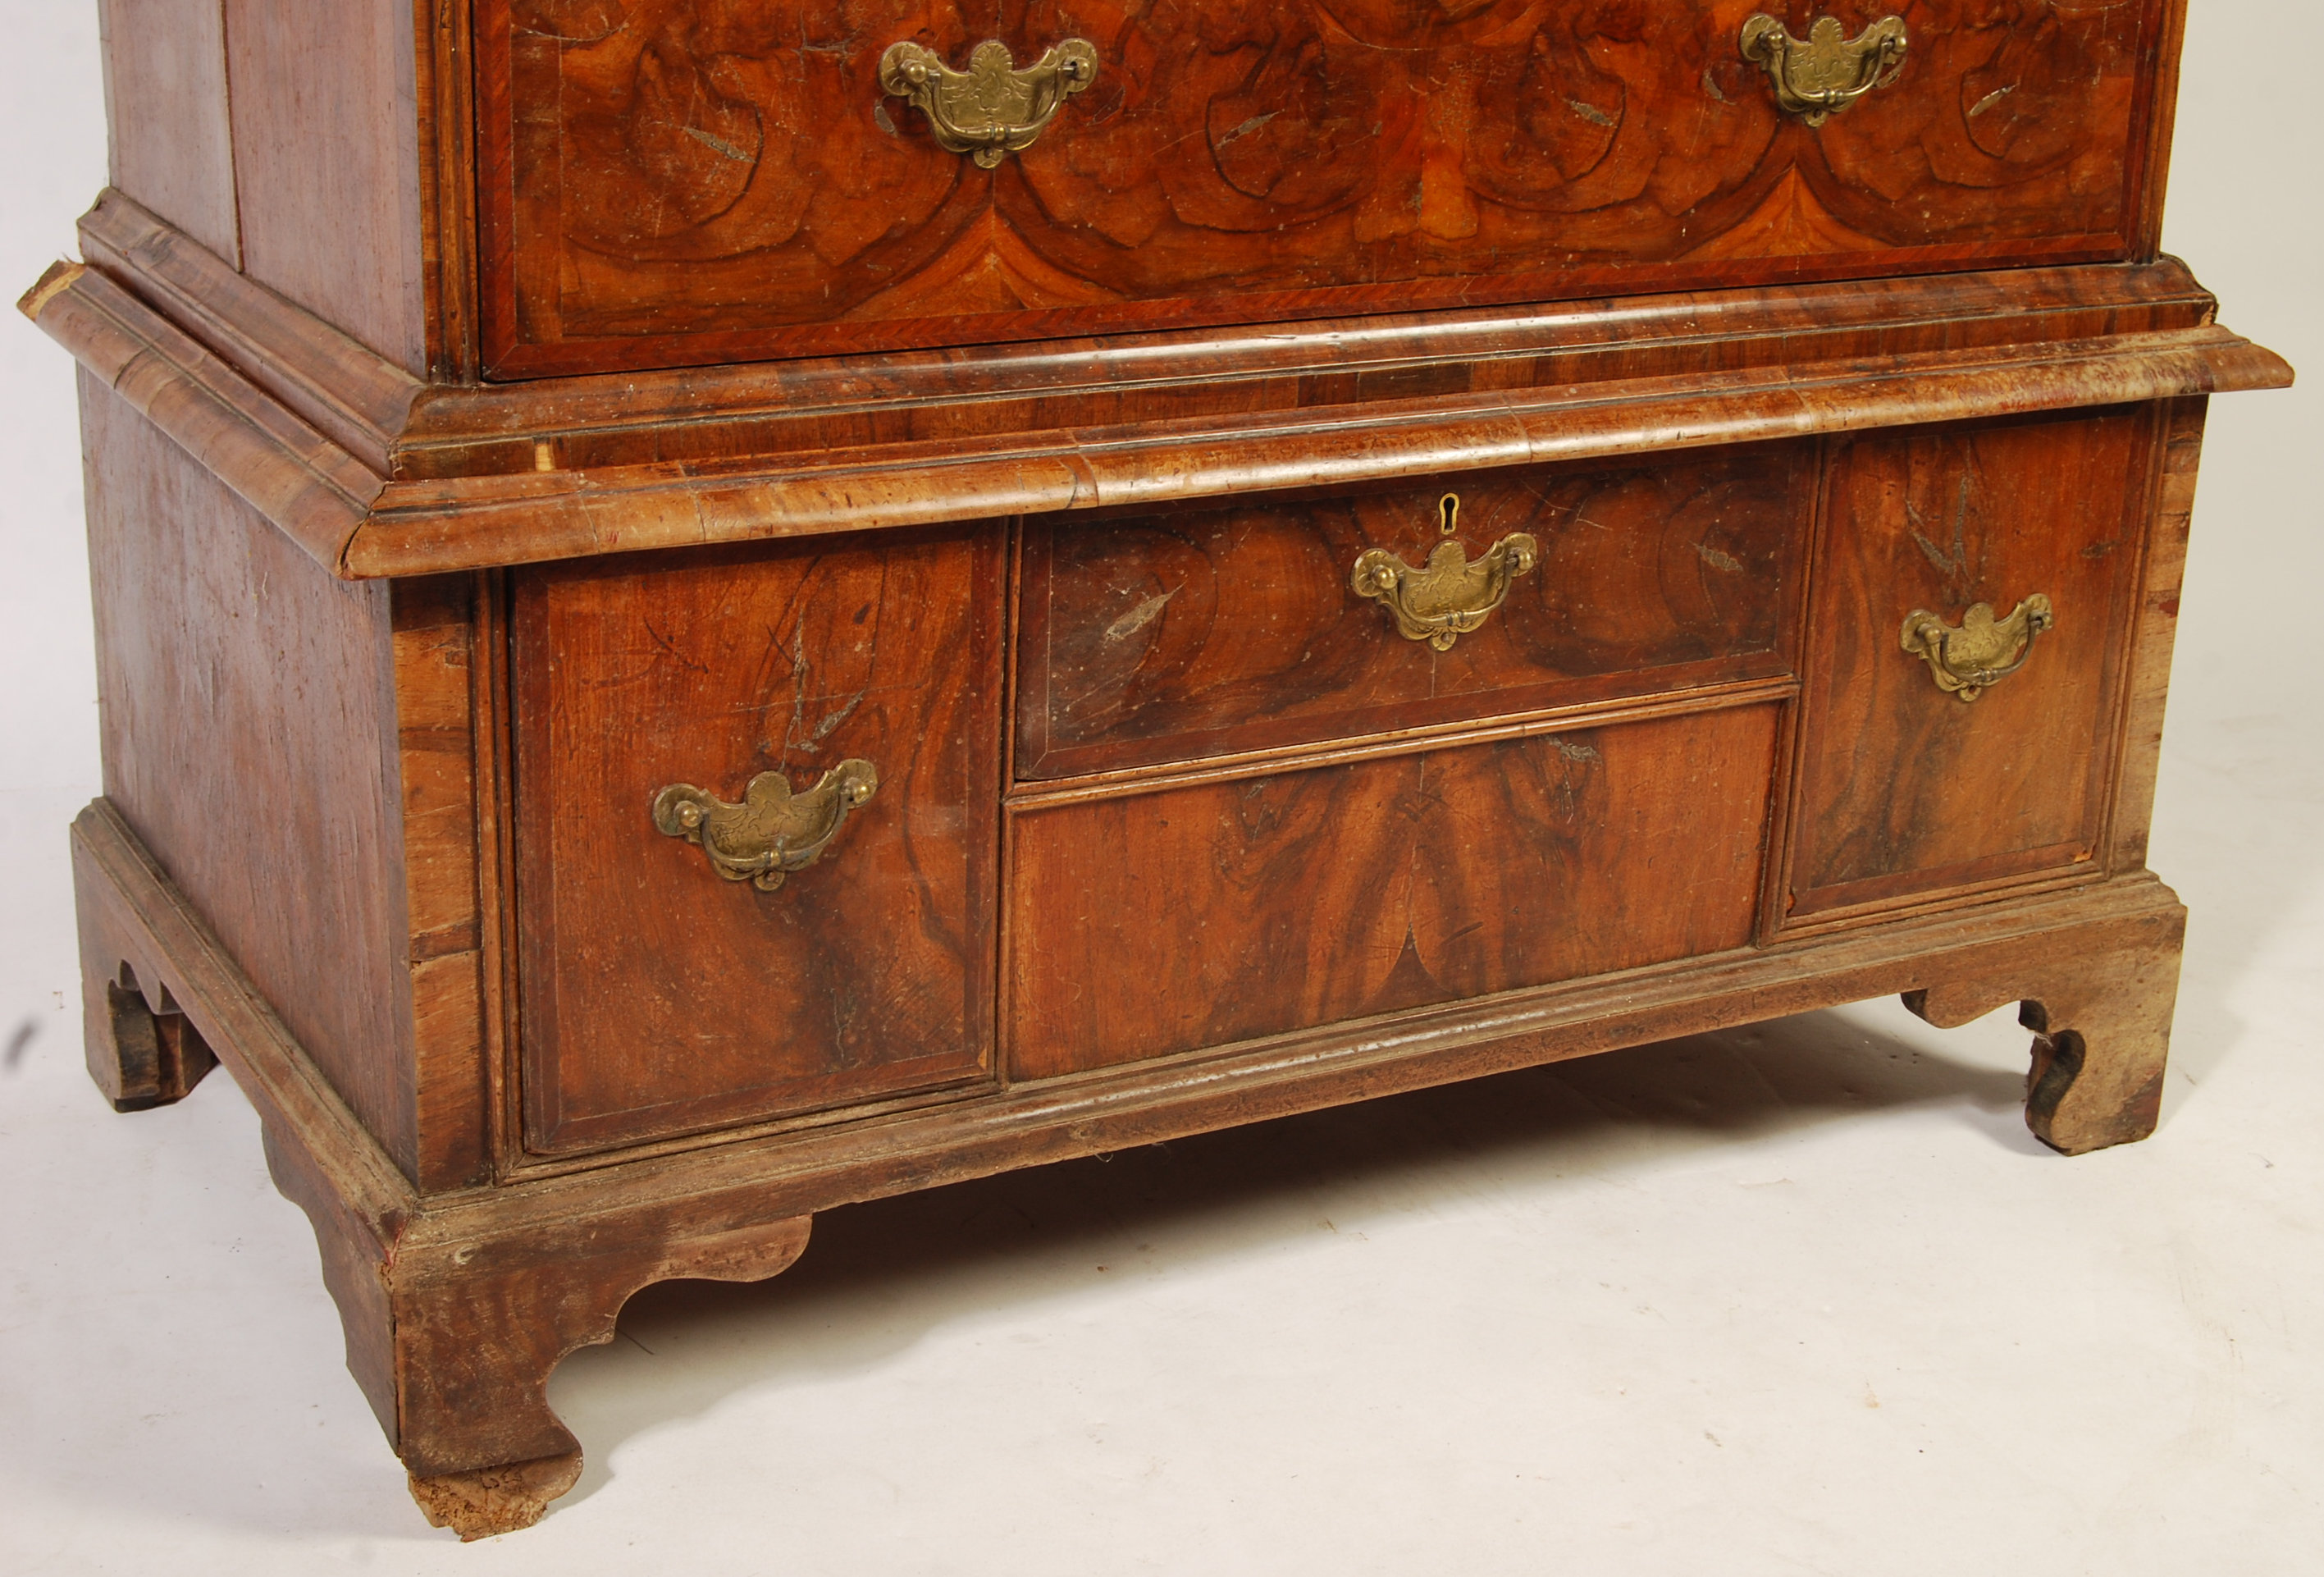 LATE 17TH / 18TH CENTURY WALNUT CHEST ON STAND - Image 2 of 11